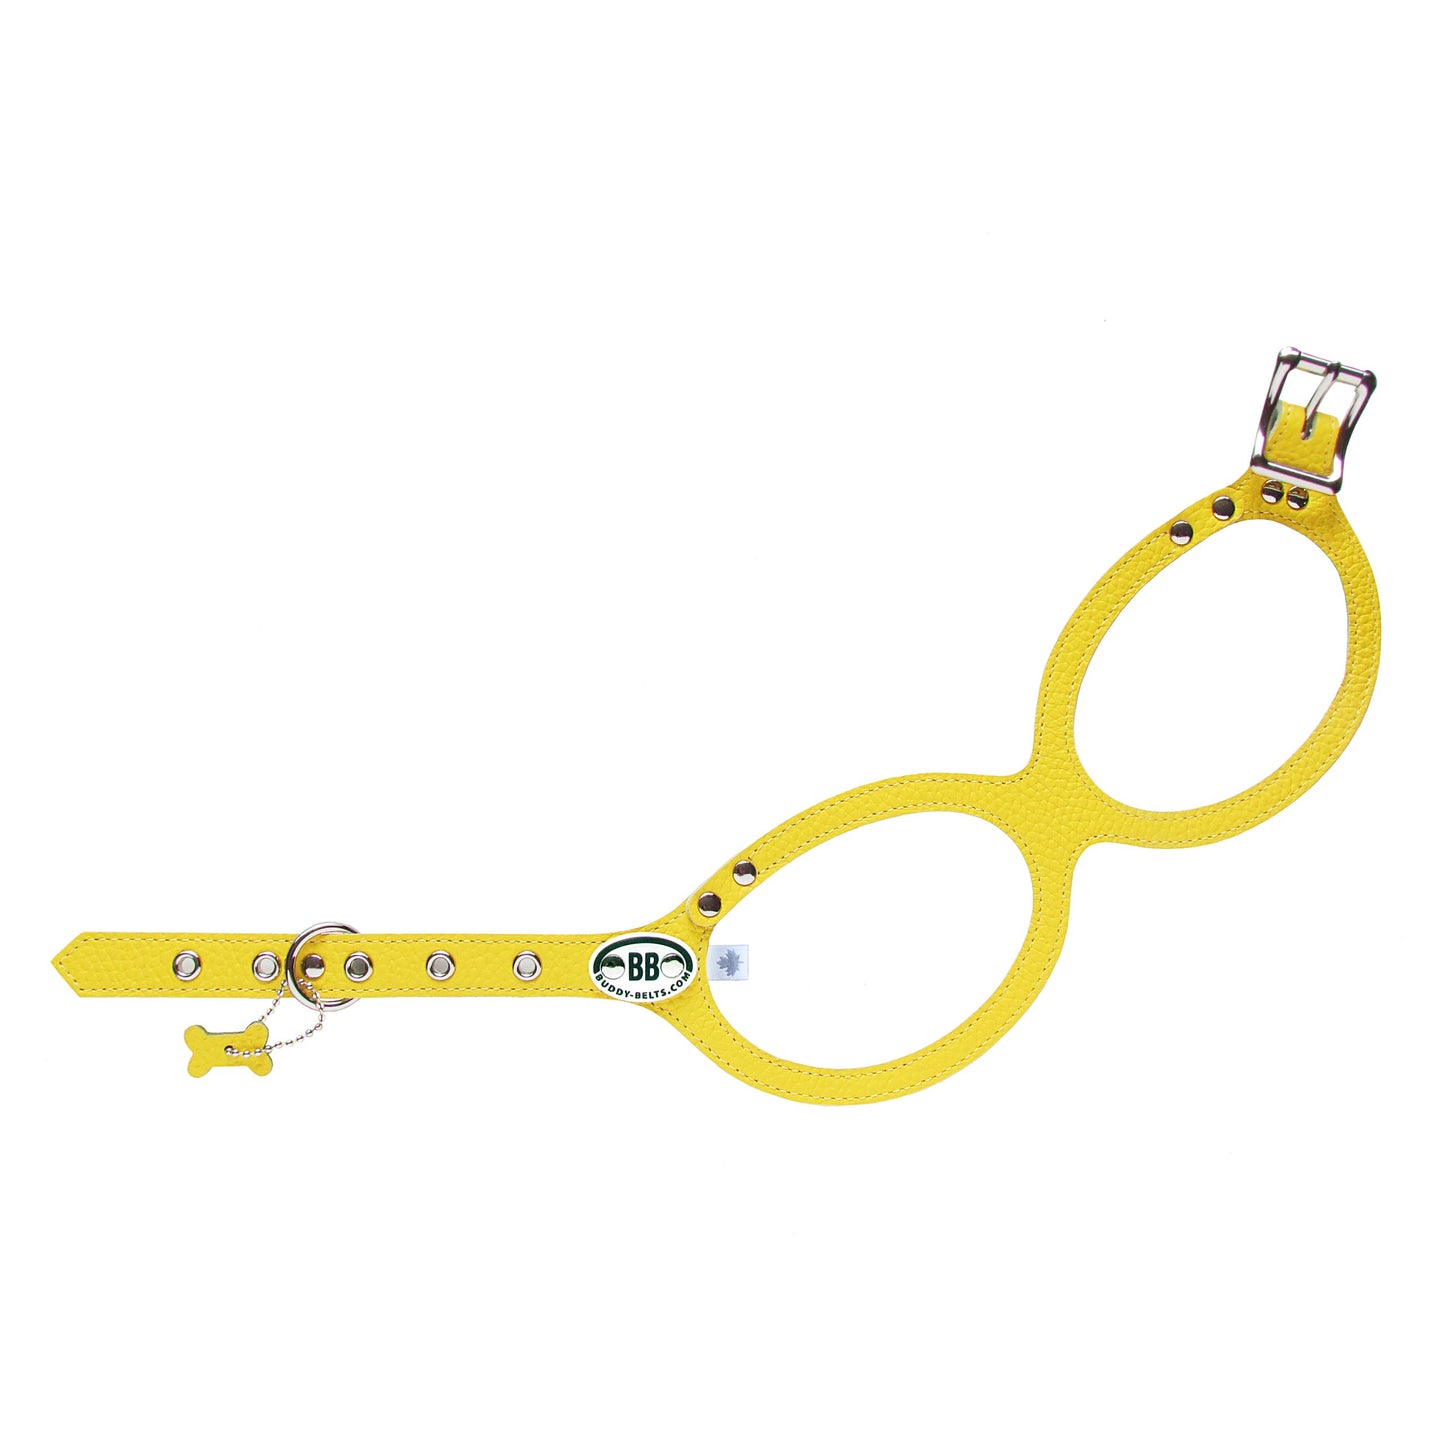 BB Harness, Size 6, Luxury BB Canary